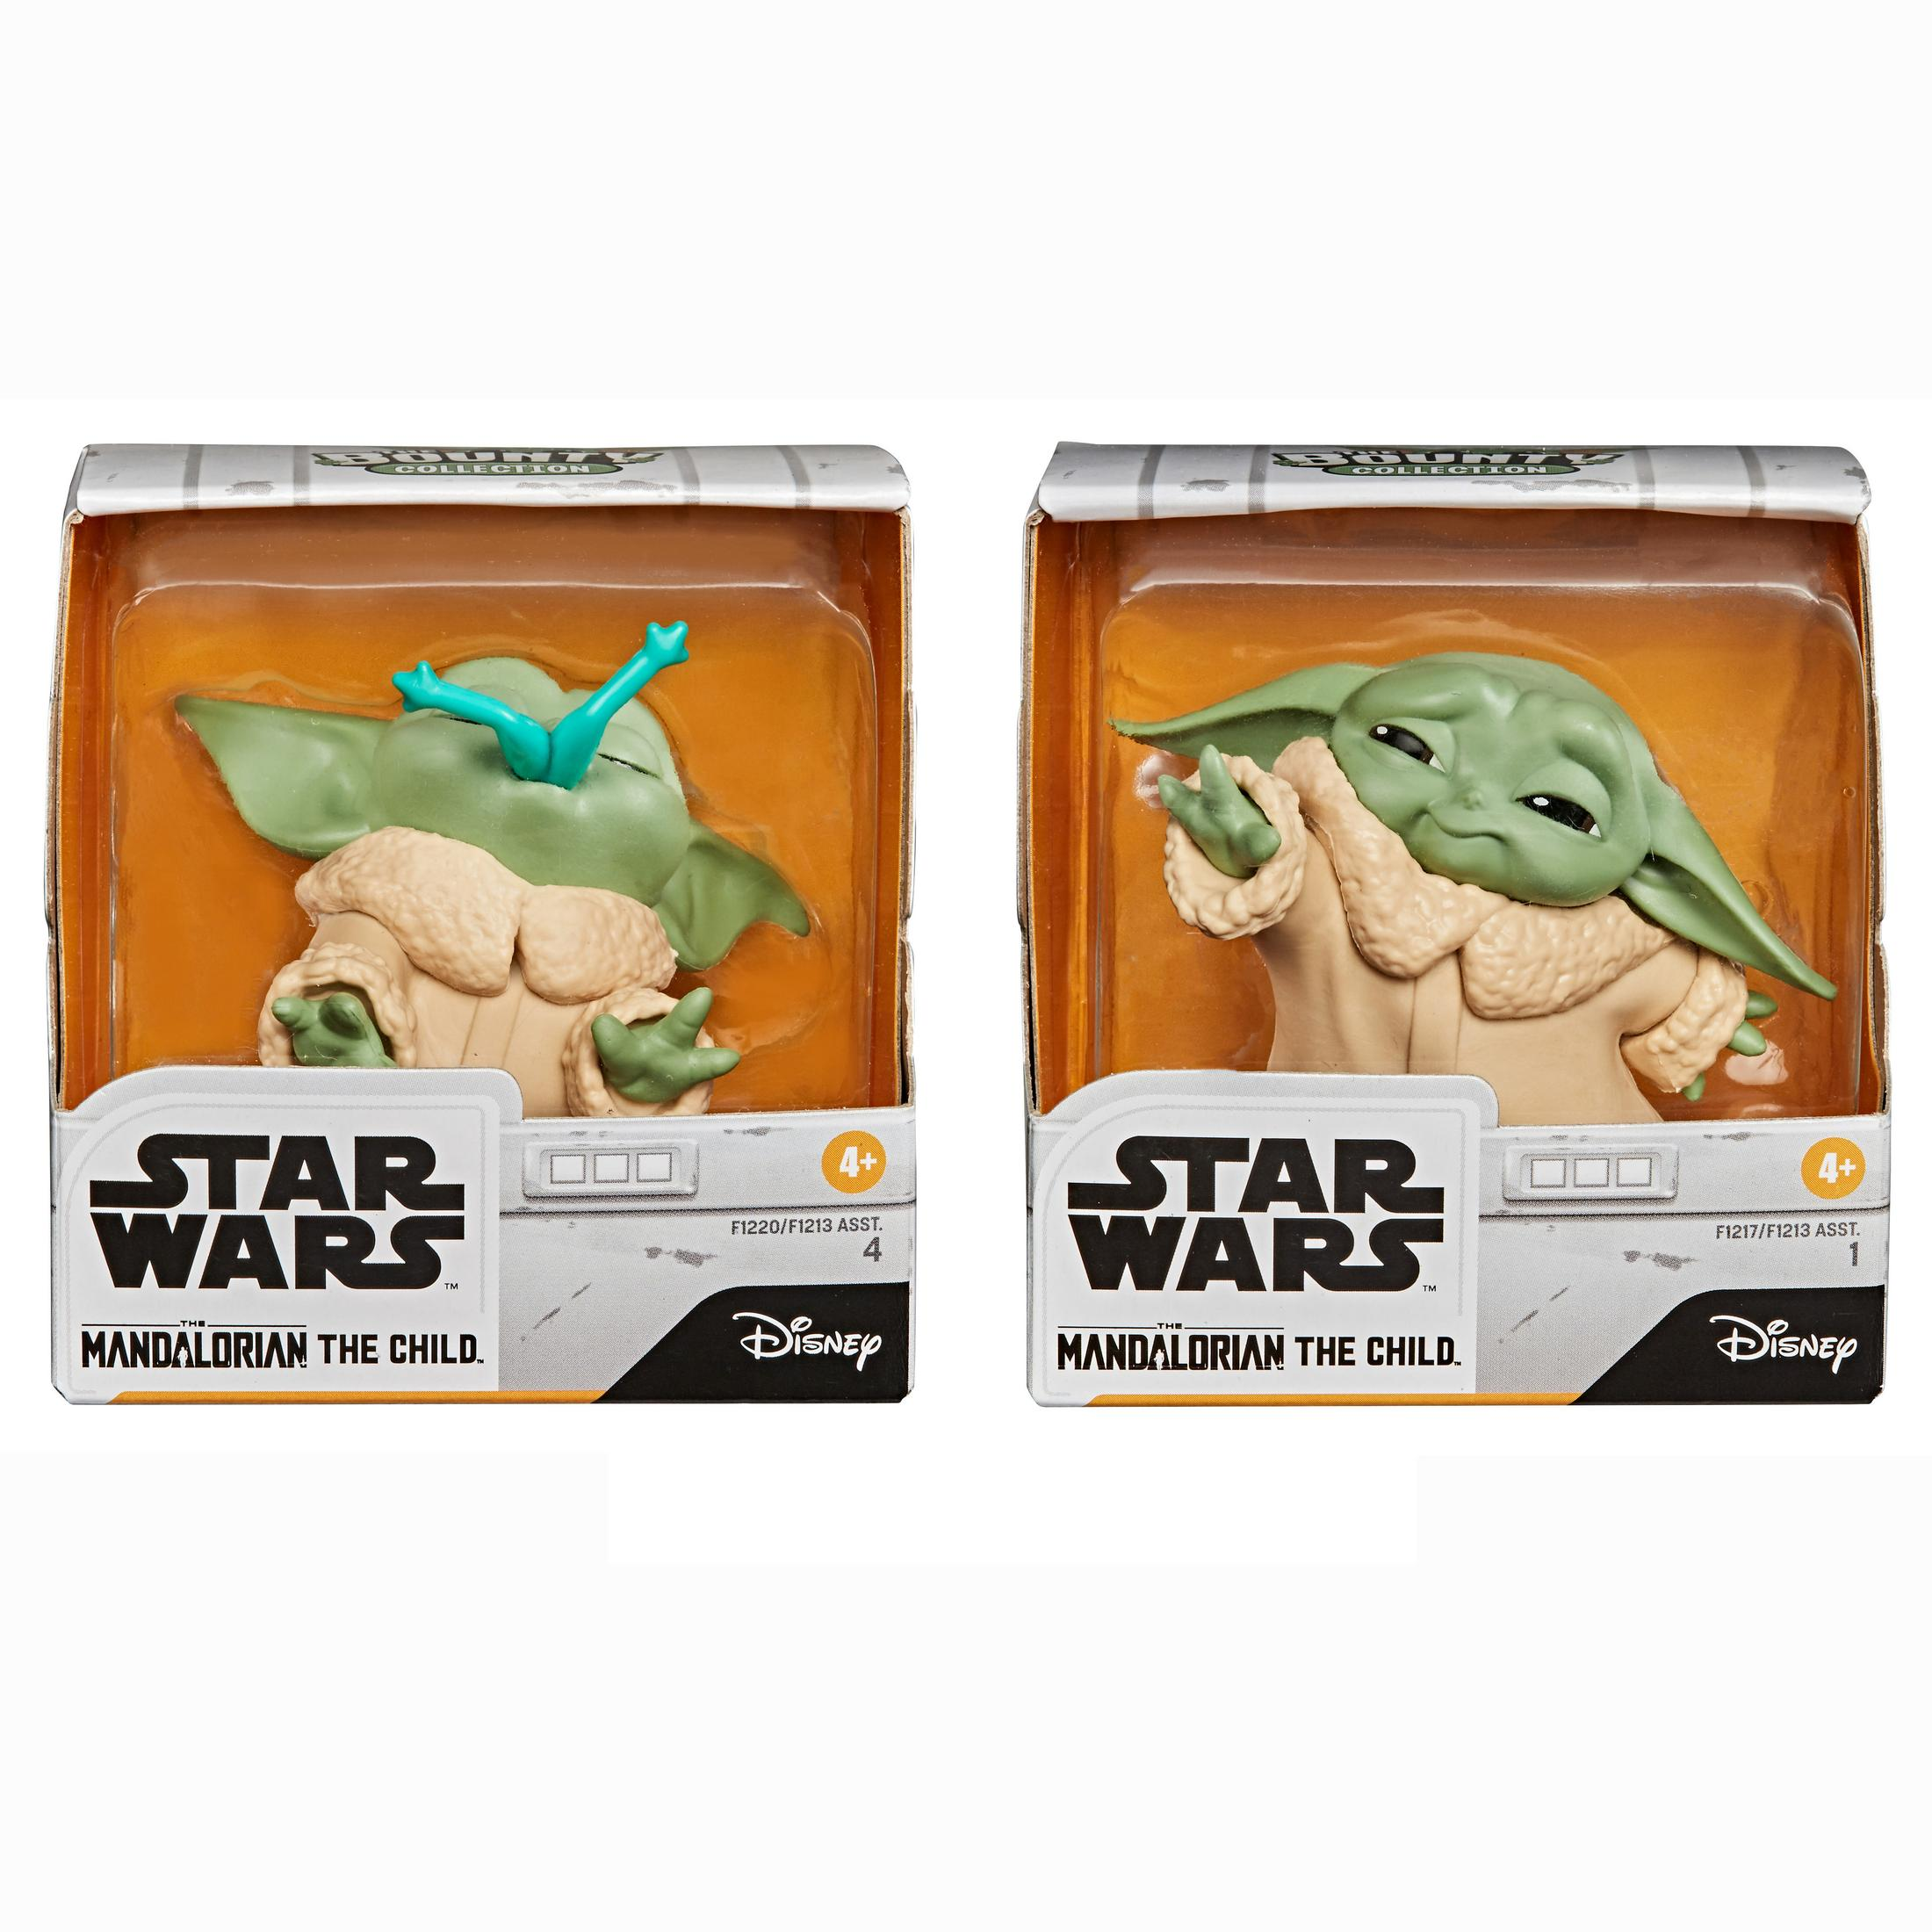 HASBRO Actionfigur Star The Figur: Yoda, The Mandalorian Child Snack) Baby Froschiger (Froggy Snack Wars